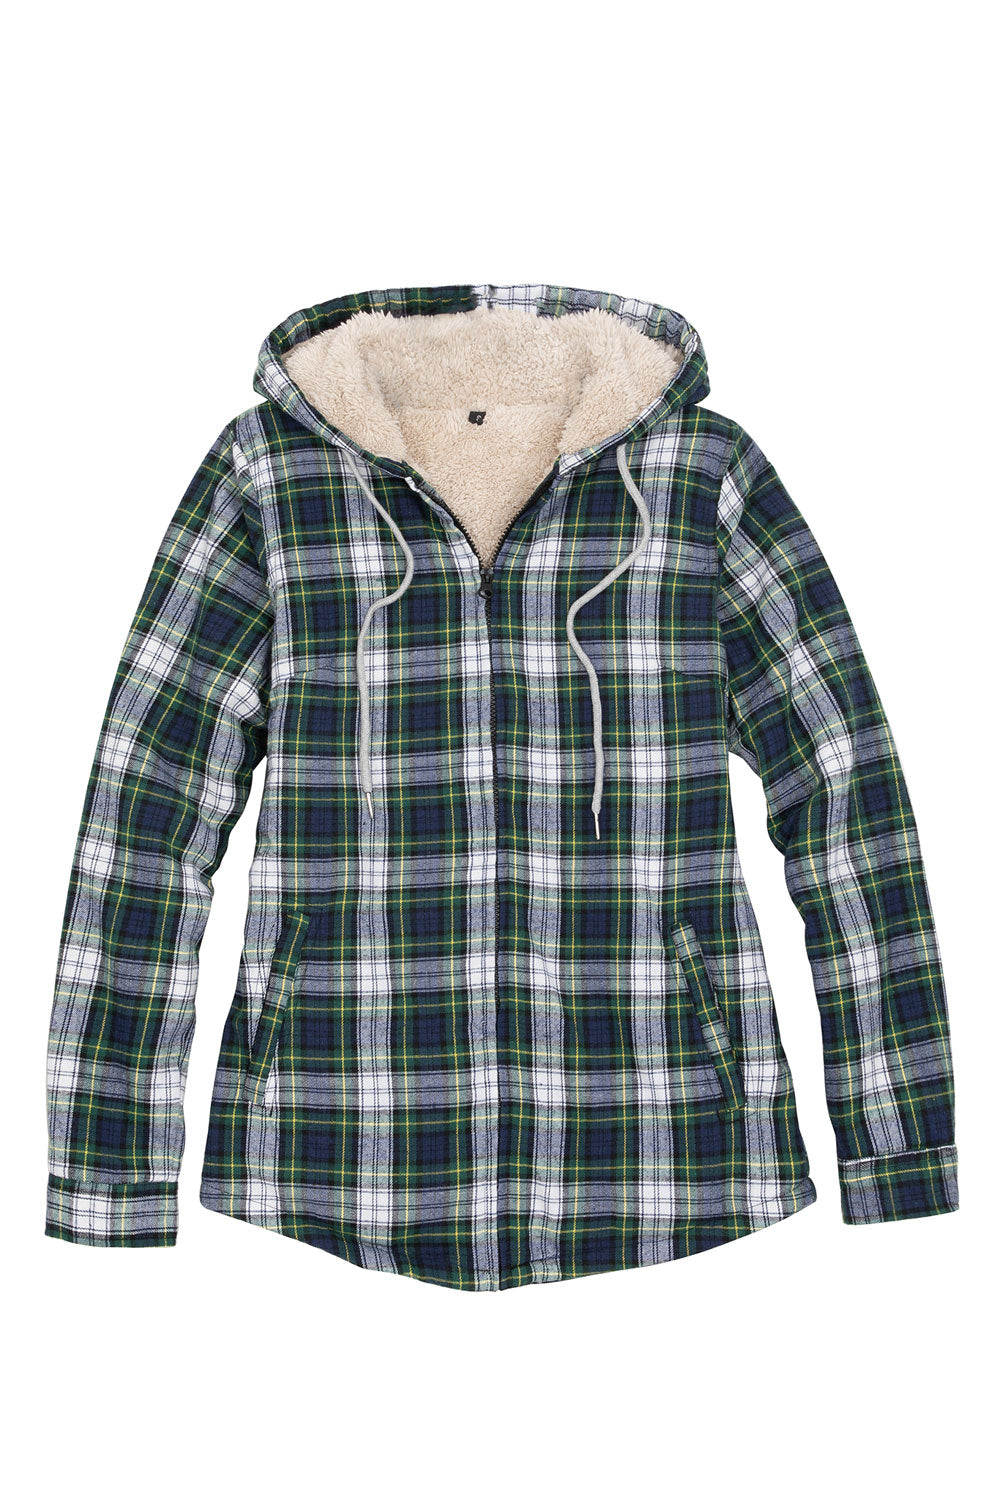 Women's Scotch Plaid Flannel Shirt, Sherpa-Lined Zip Hoodie at